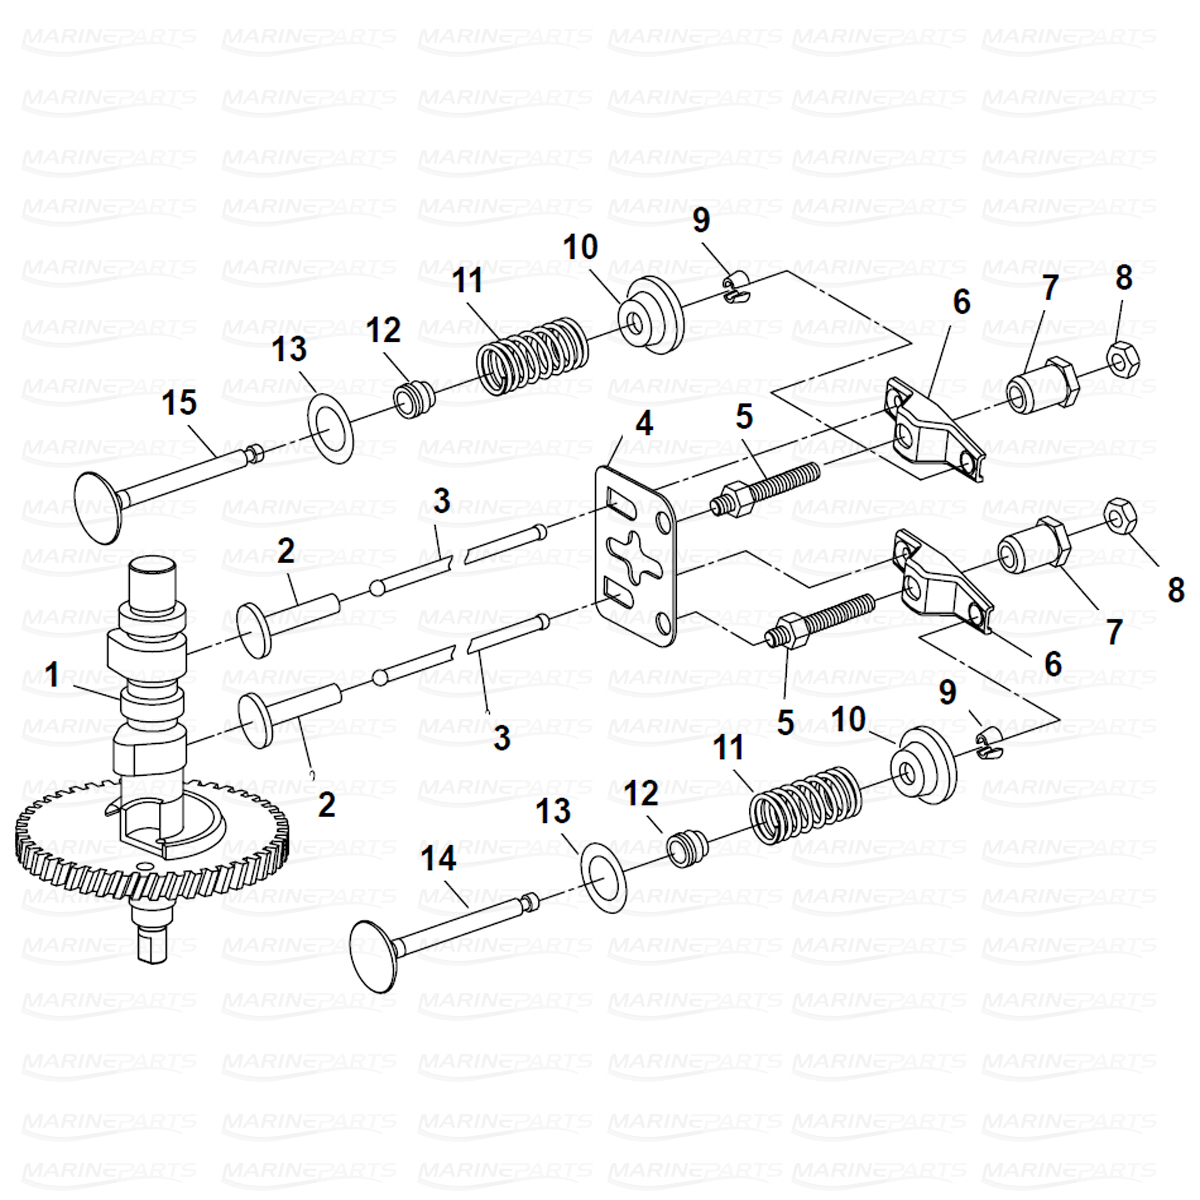 Exploded view camshaft, Parsun 6 hp